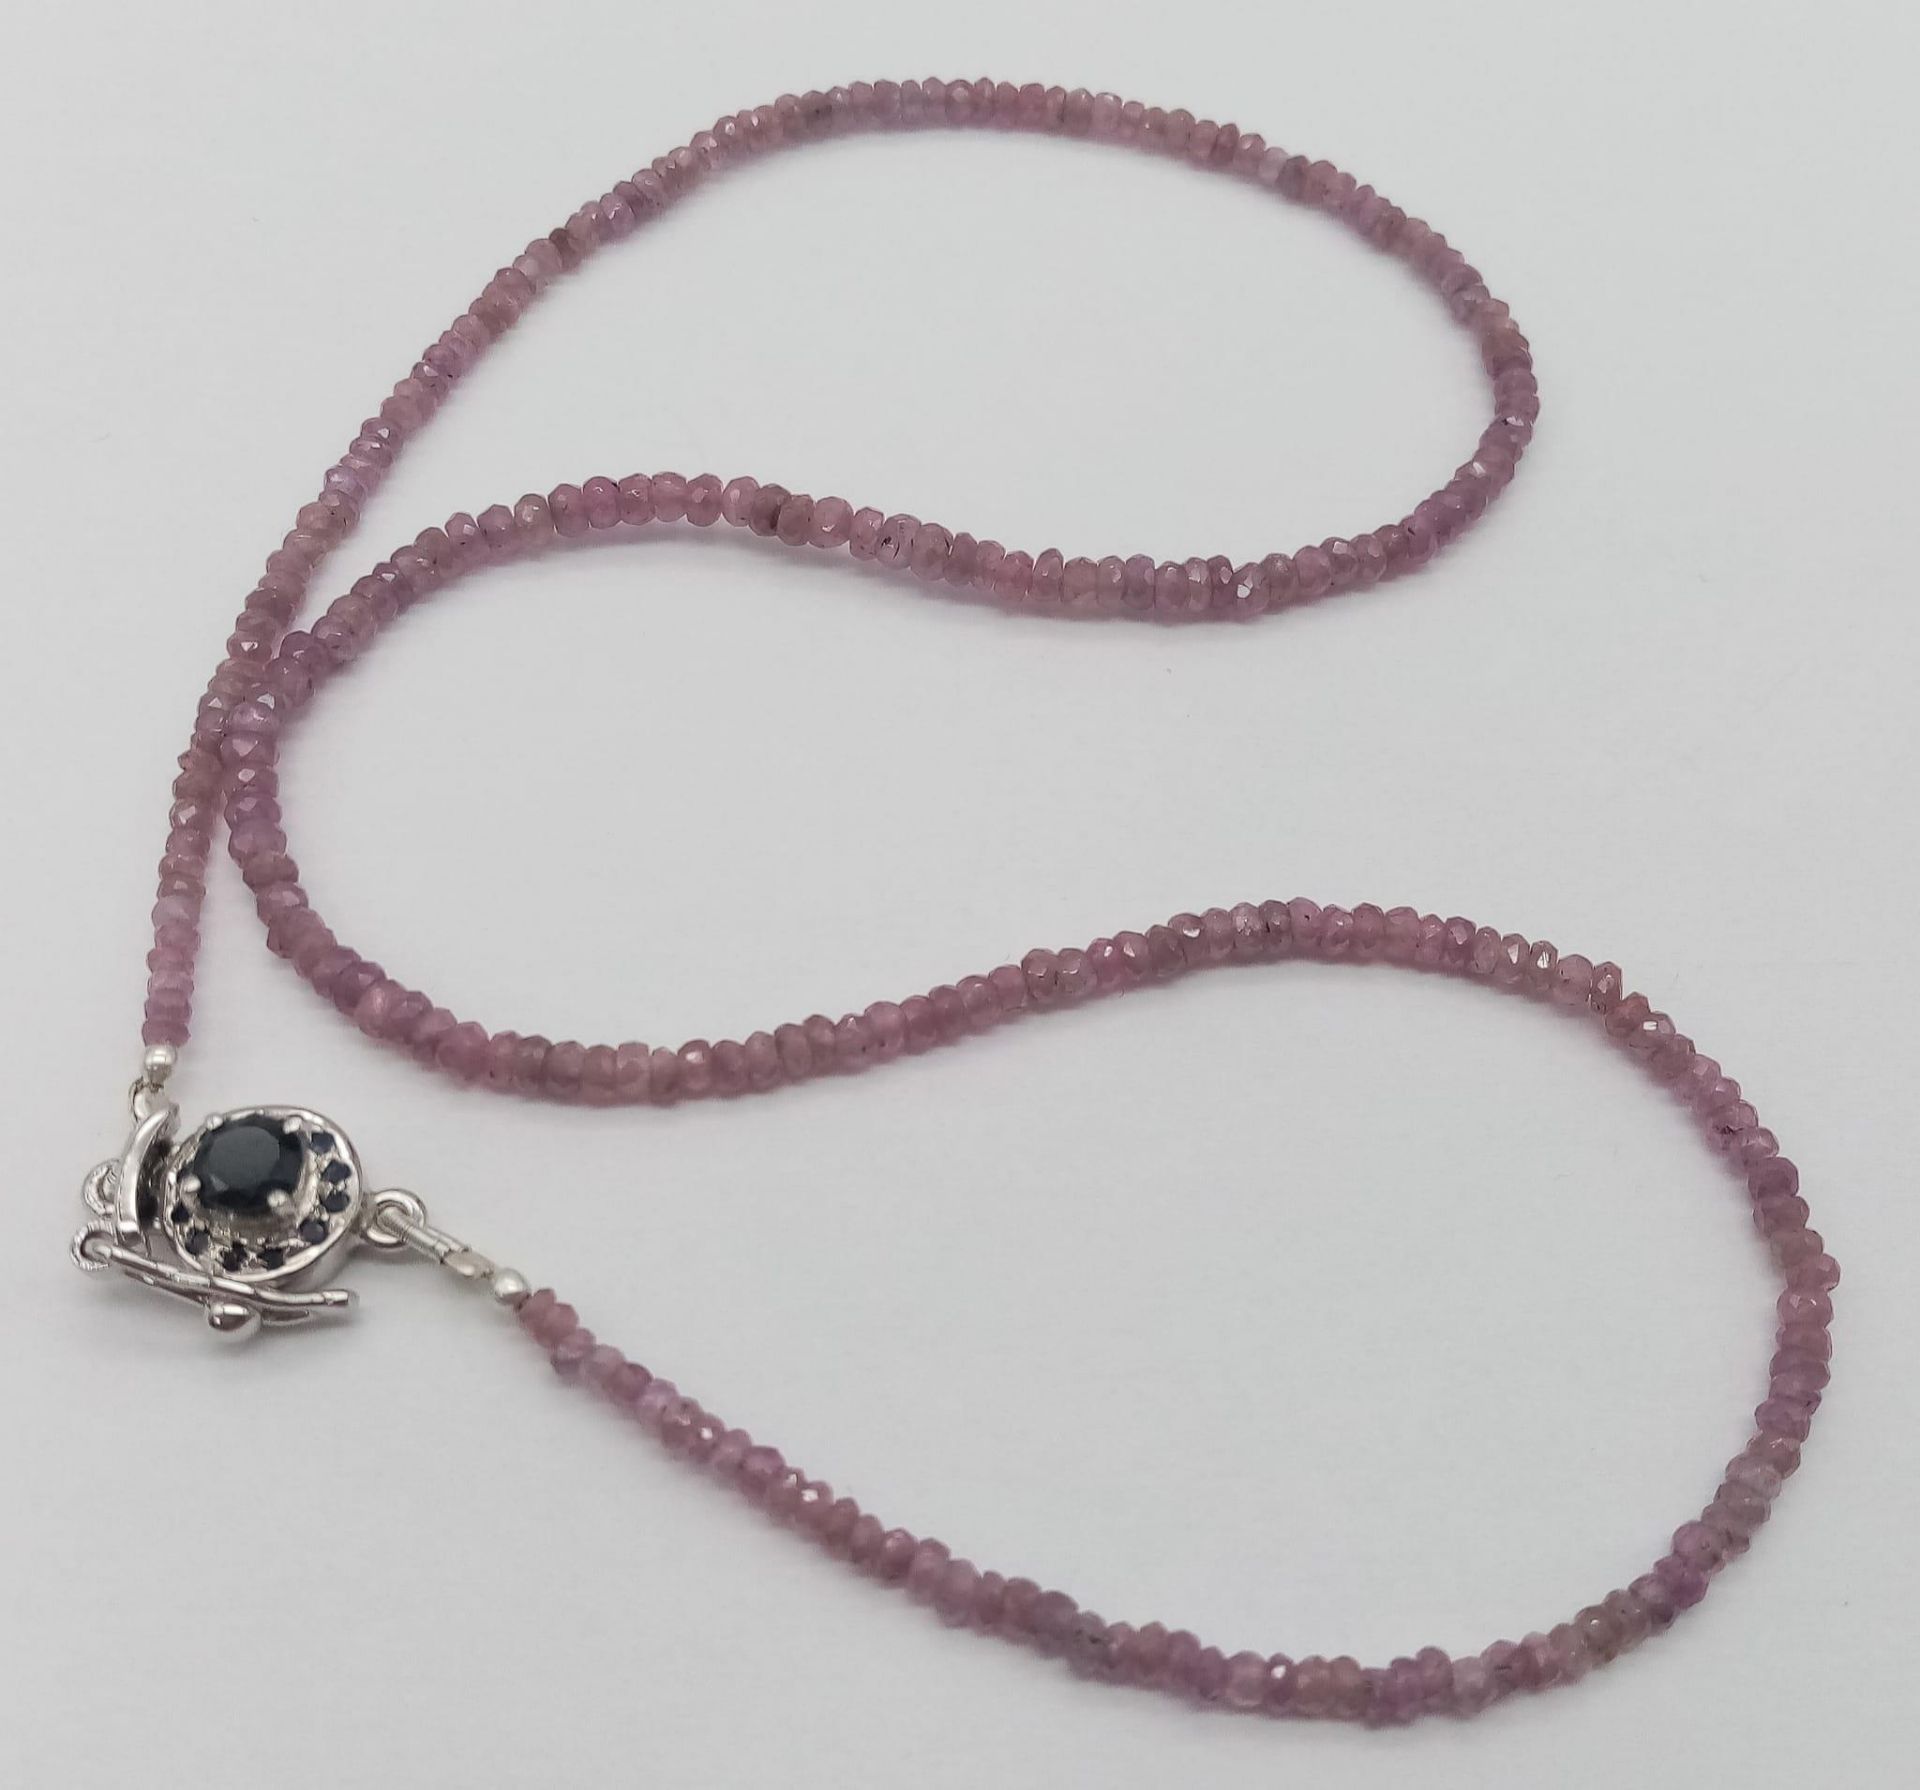 A Single Strand Pink Sapphire Necklace with Ruby and 925 Silver Clasp. 42cm length.